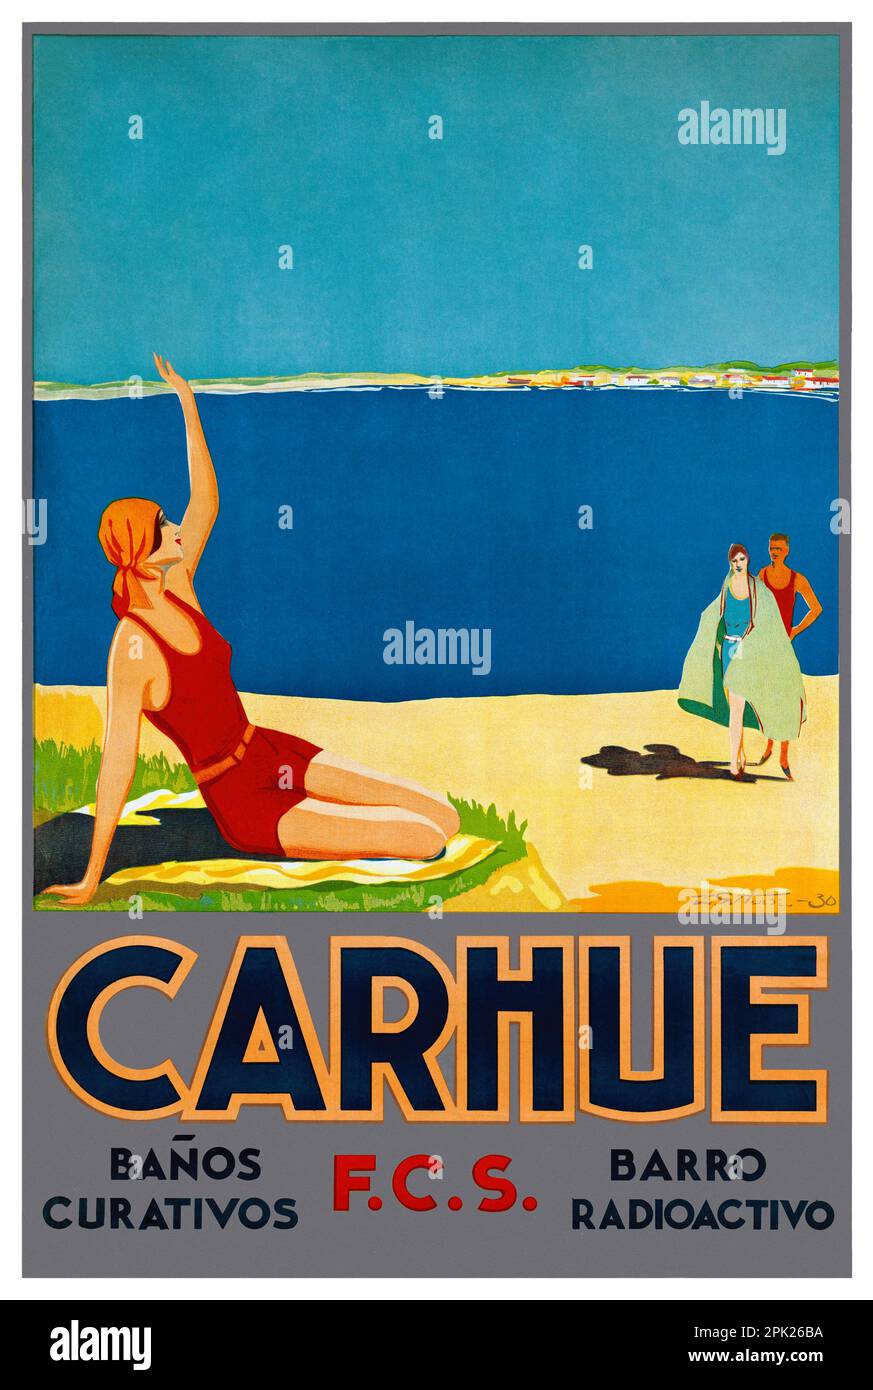 Carhue. Banos Curativos. F.C.S. Barro Radioactivo. Artist unknown. Poster published in 1930 in Argentina. Stock Photo